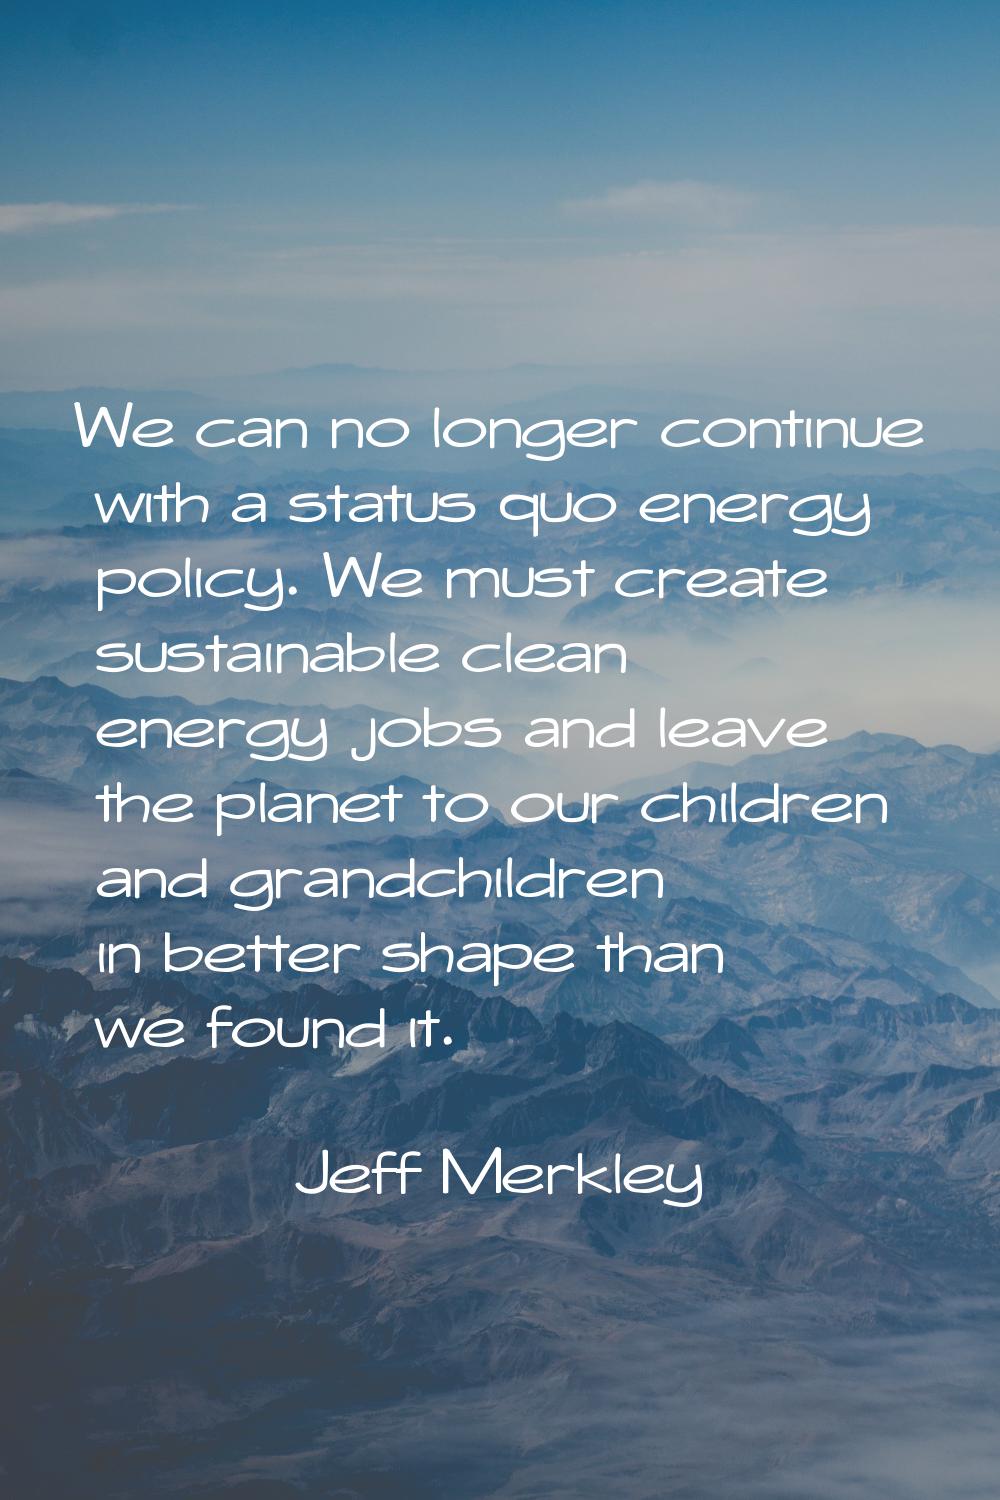 We can no longer continue with a status quo energy policy. We must create sustainable clean energy 